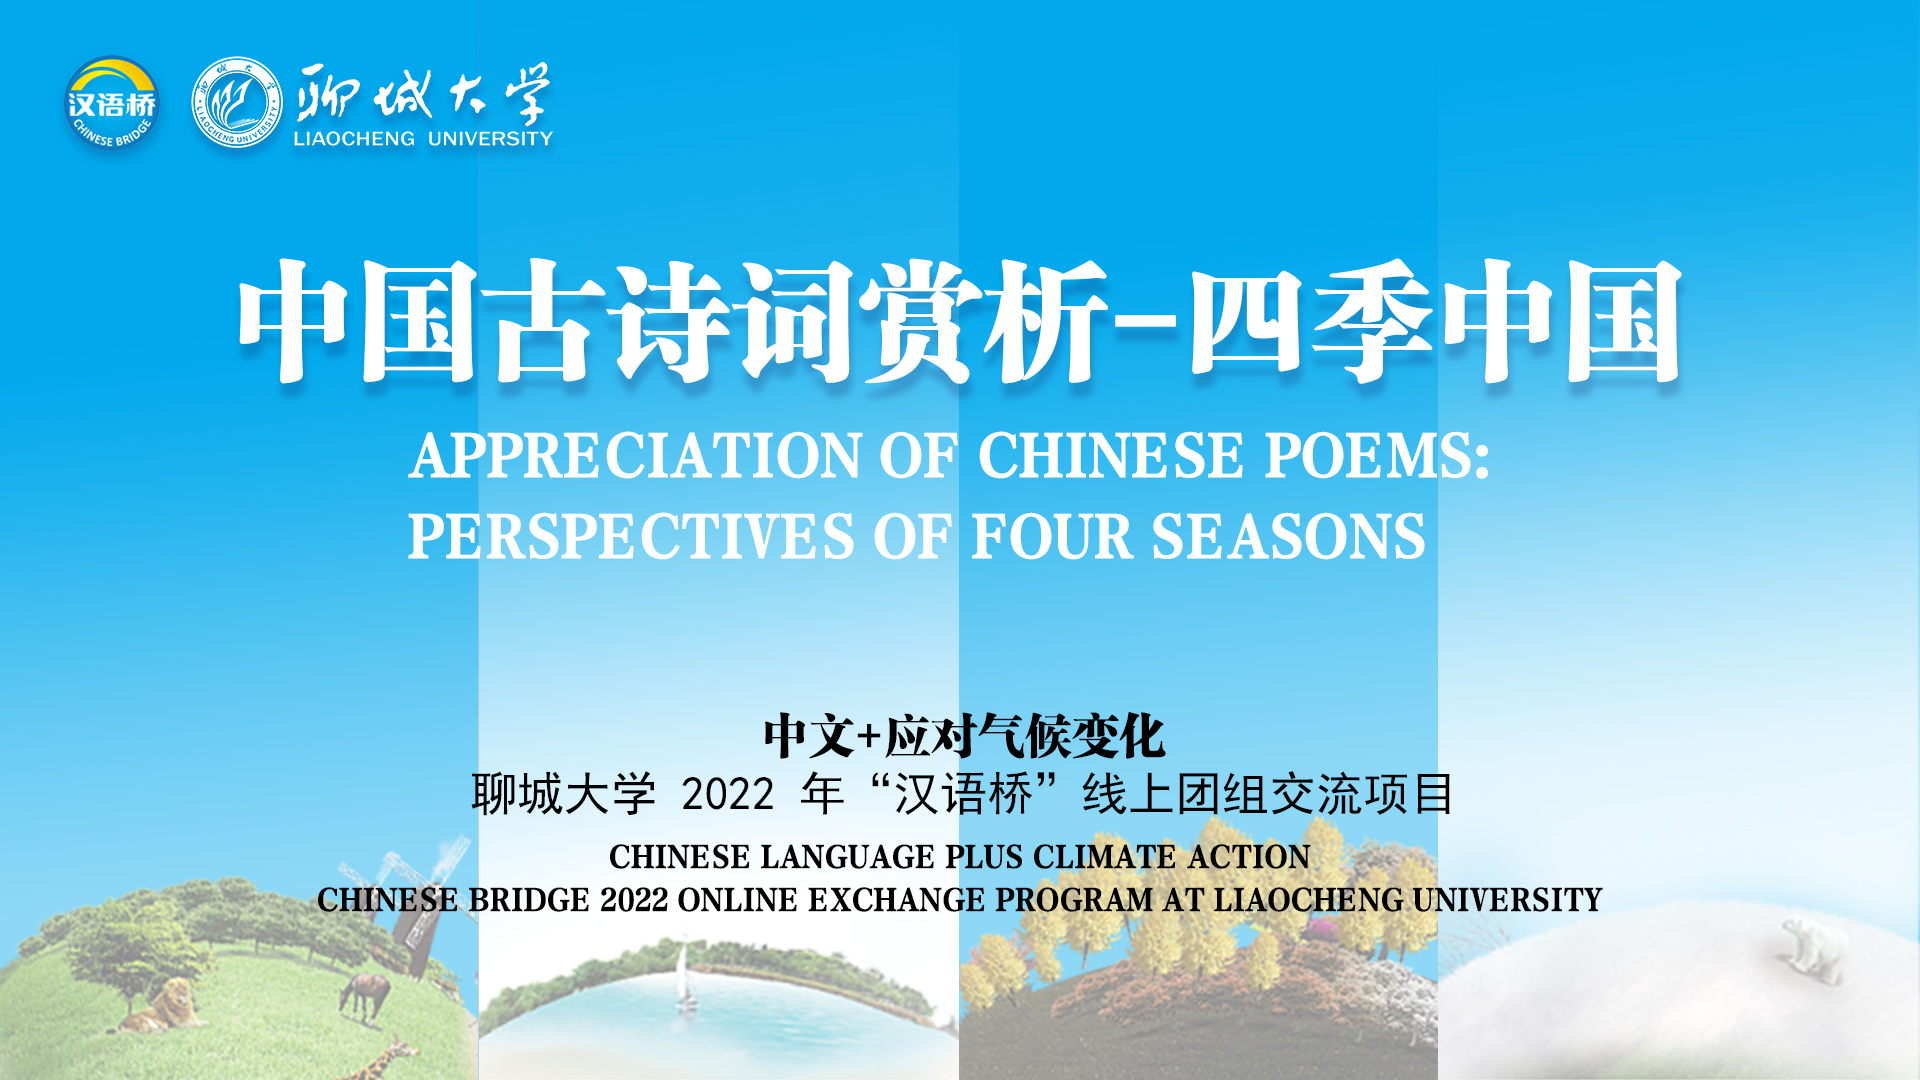 Appreciation of Chinese Poems: Perspectives of Four Seasons